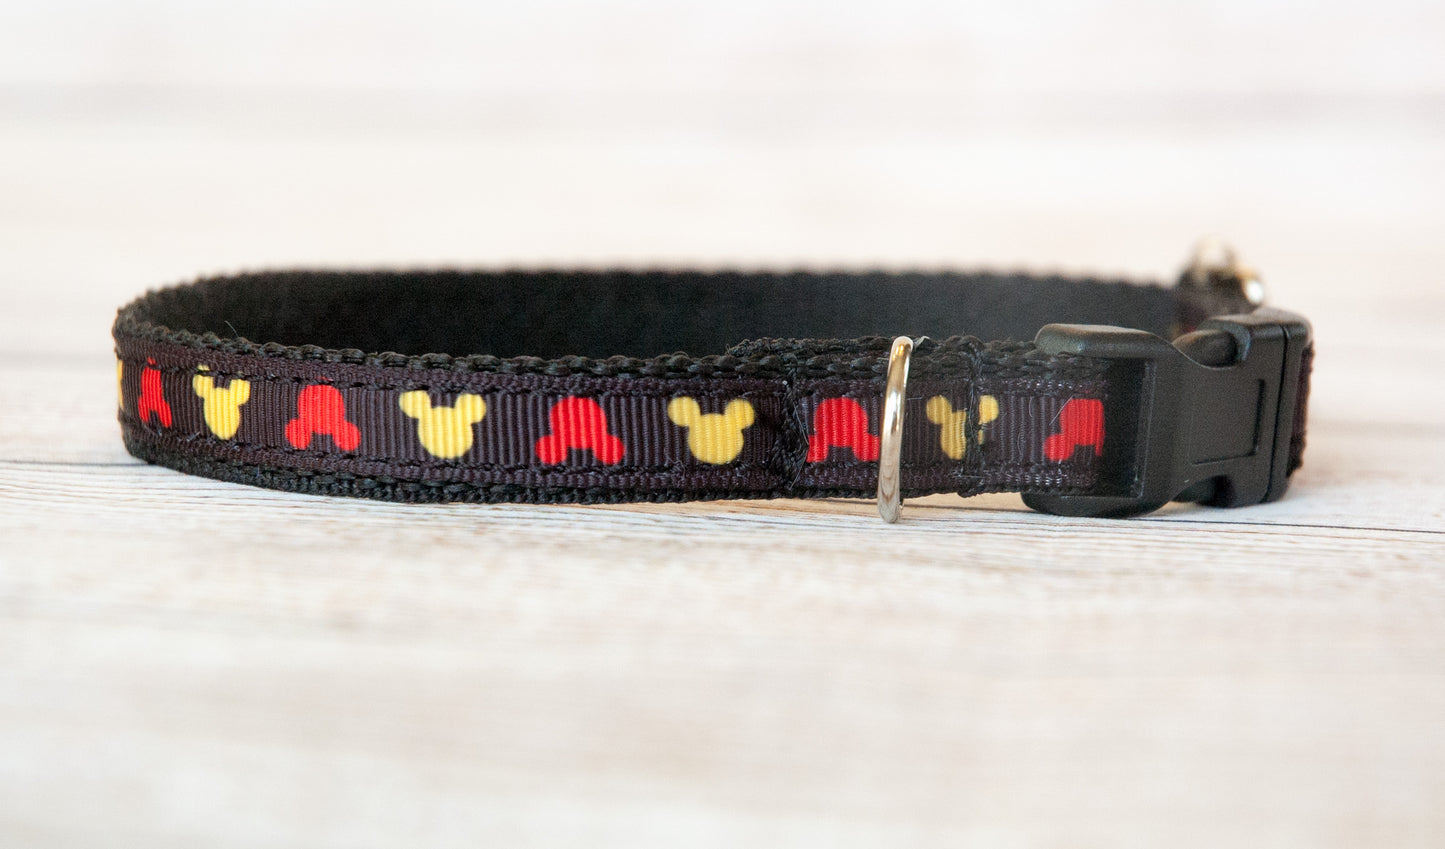 Yellow and Red Mouse head small dog or cat collar 1/2" wide